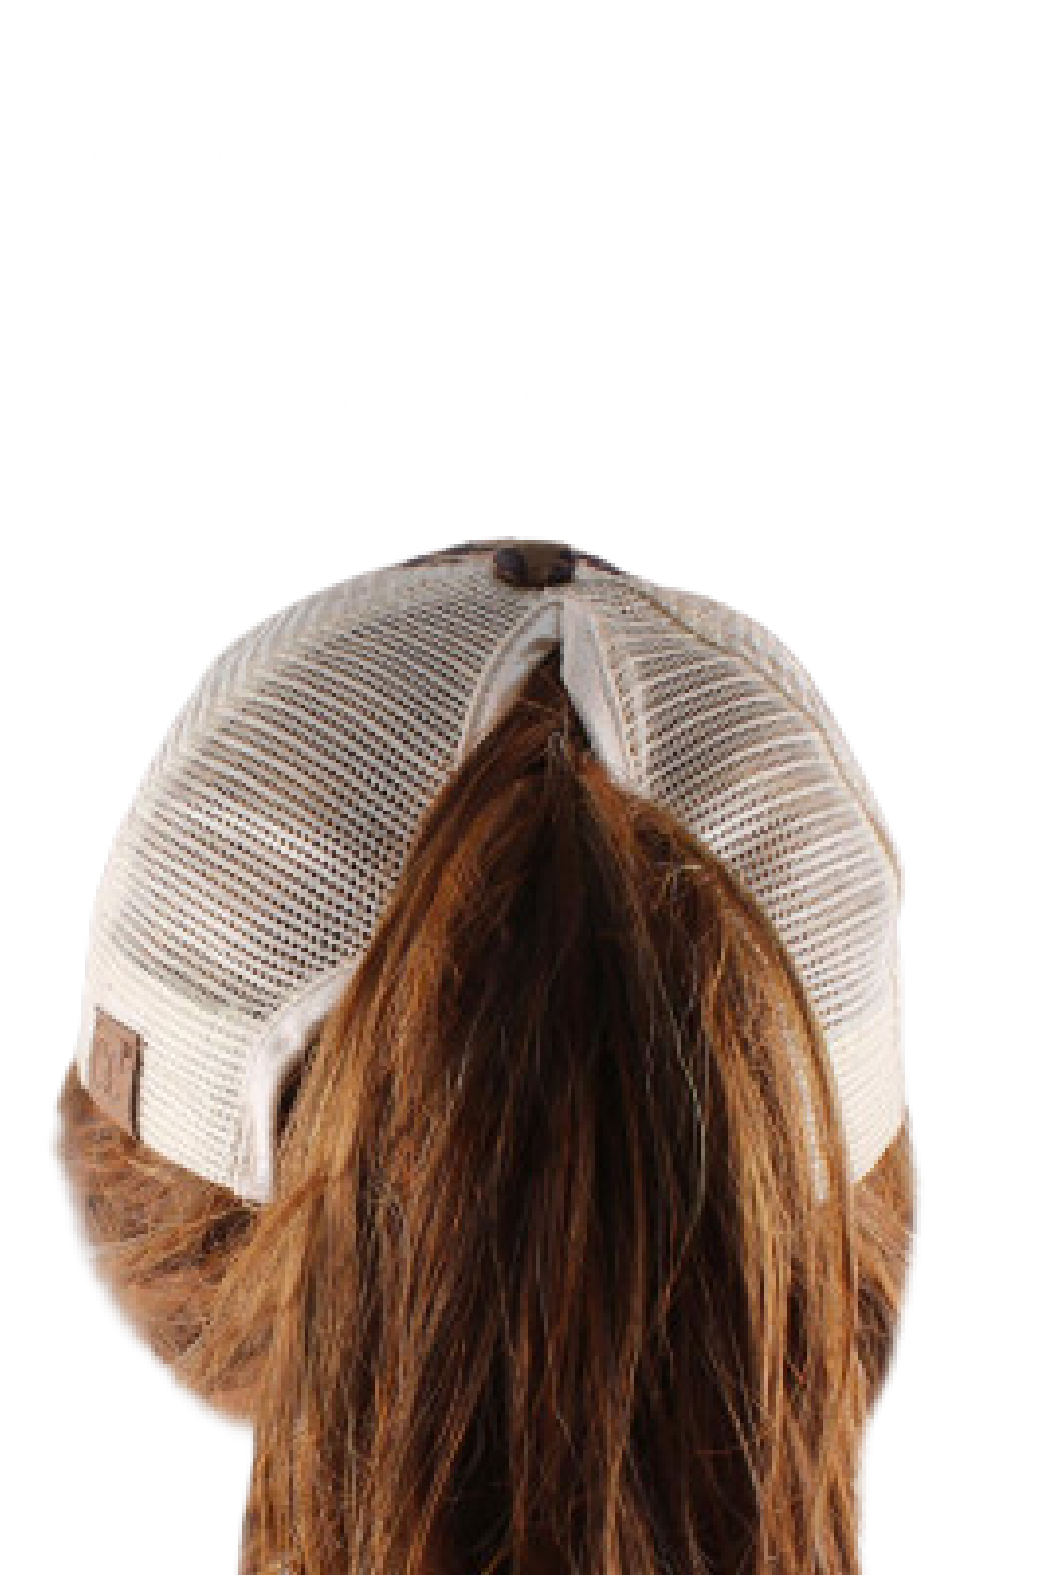 Upcycled Leopard Criss-Cross Ponytail Cap